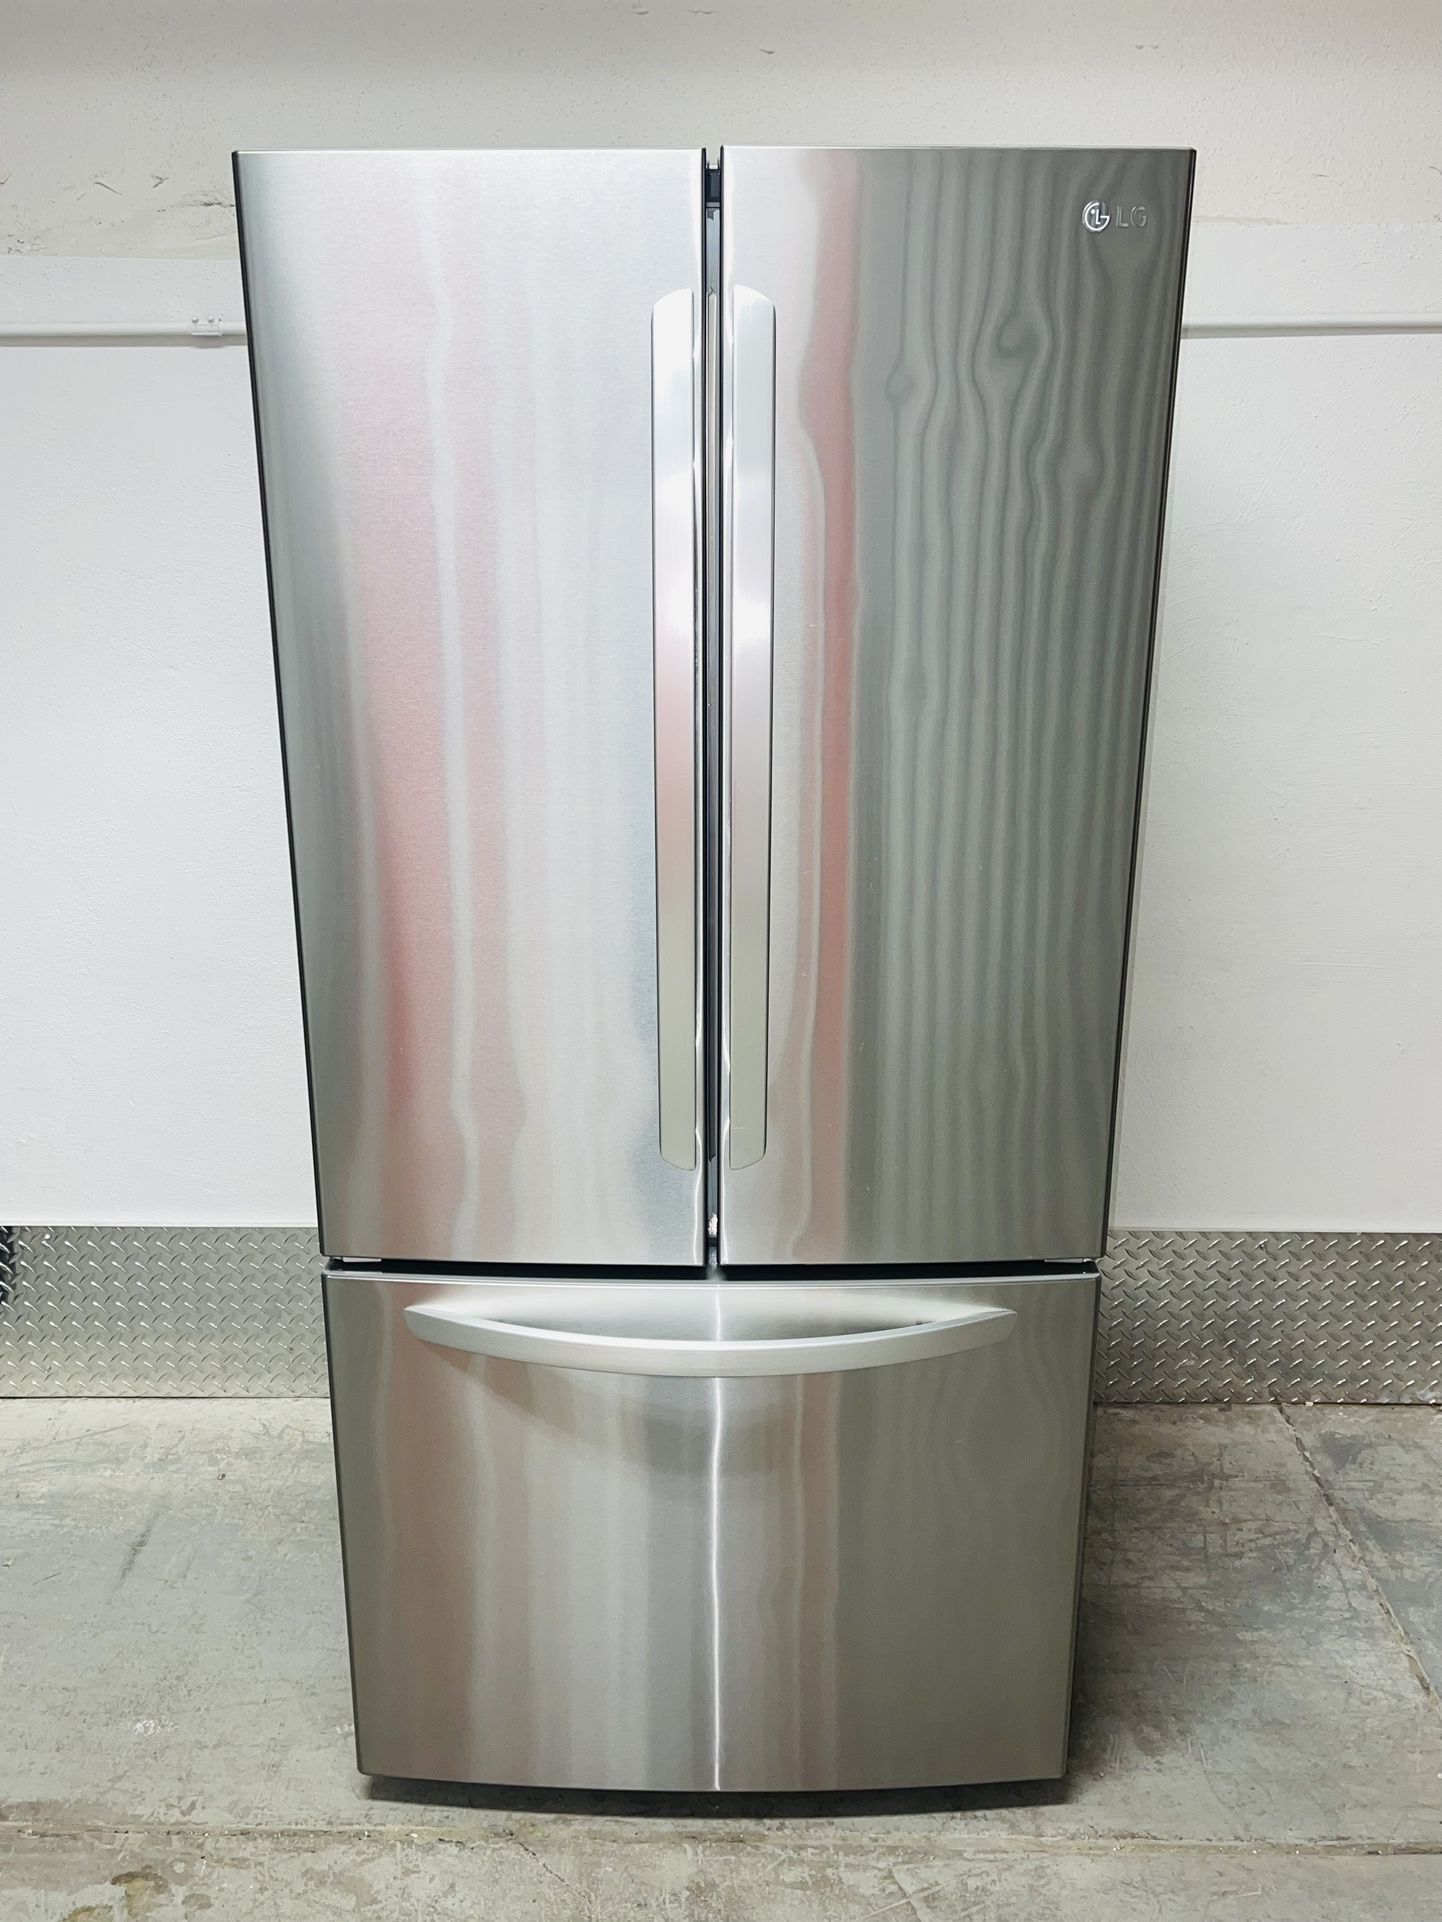 LG stainless steel refrigerator 33X69X29 in very perfect condition a receipt for 60 days warranty